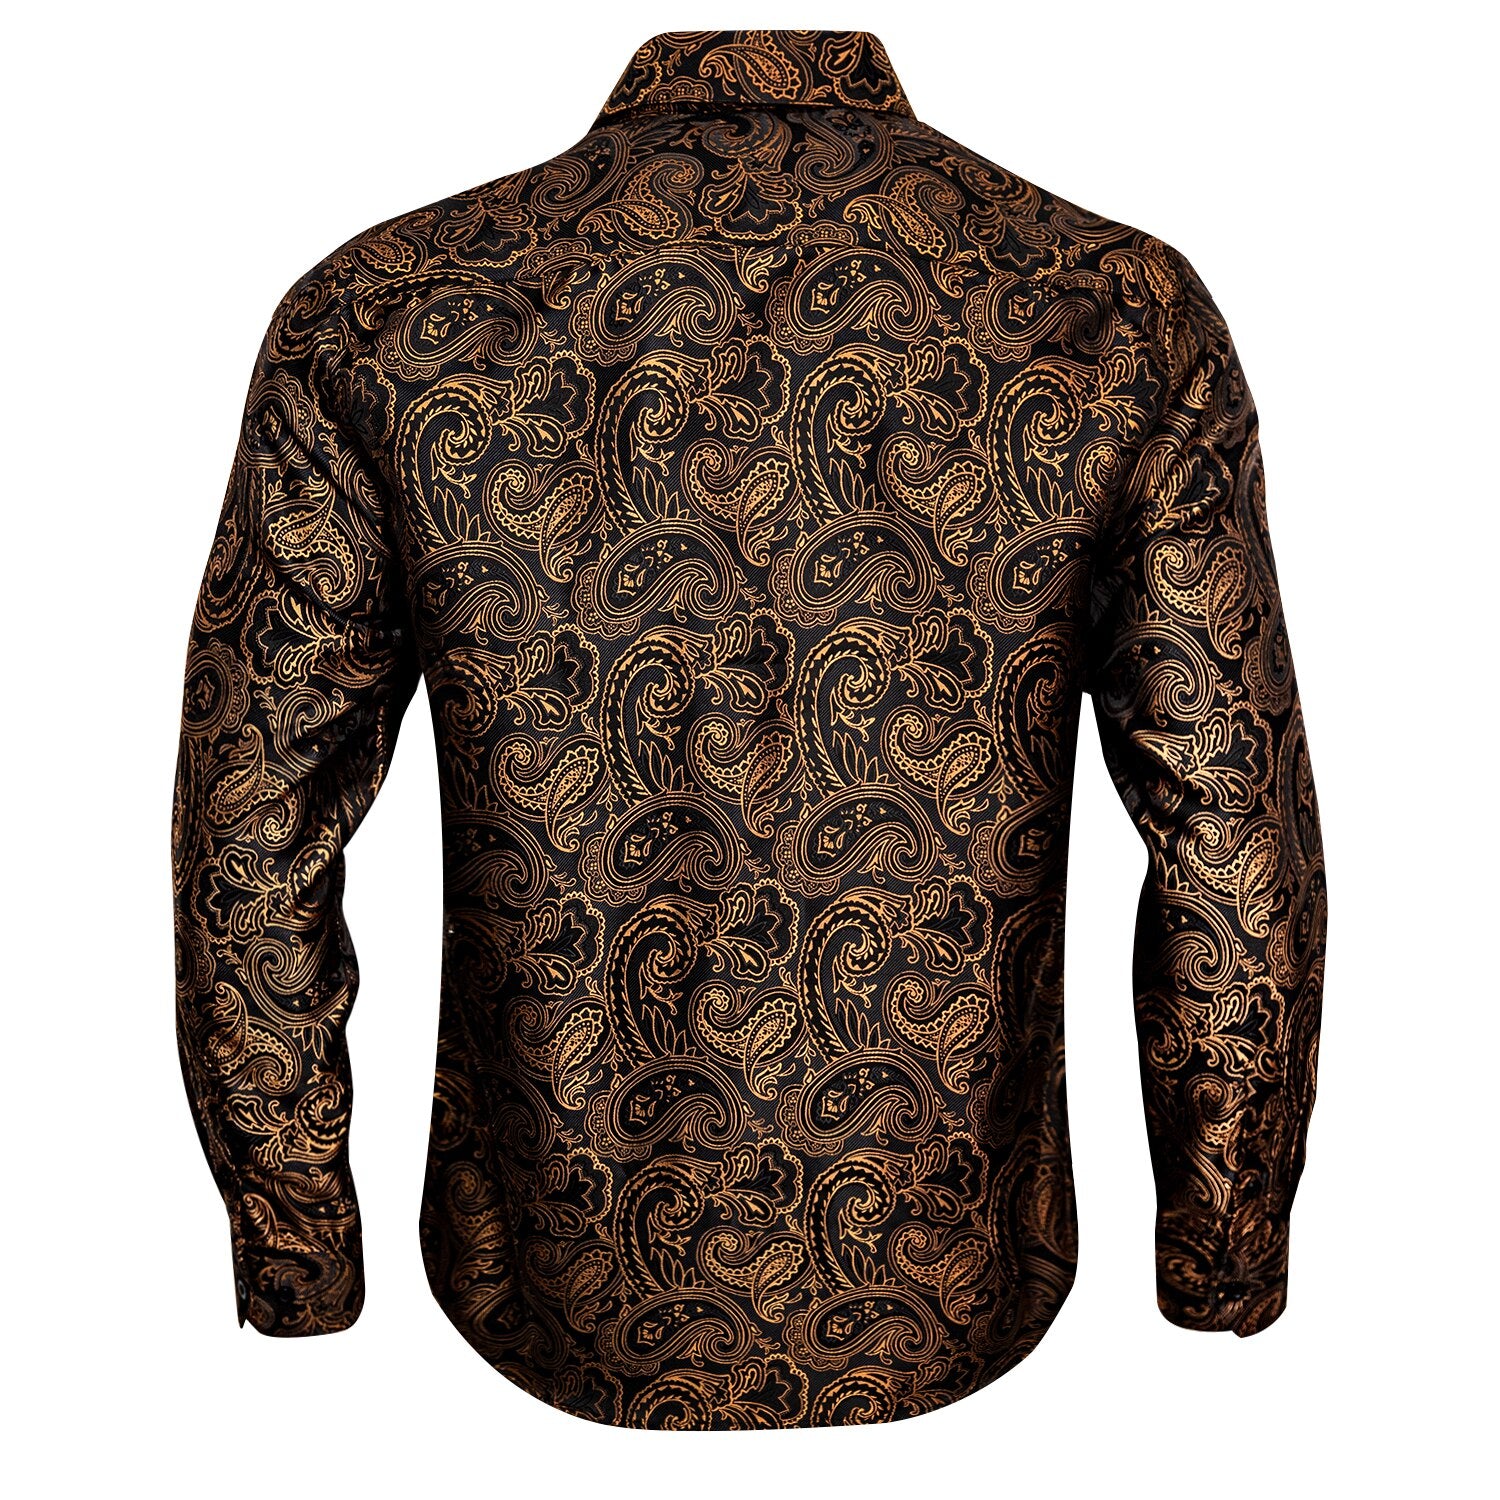 Gold and Black Paisley Dress Shirt | Beautiful ties at unbelievable prices.